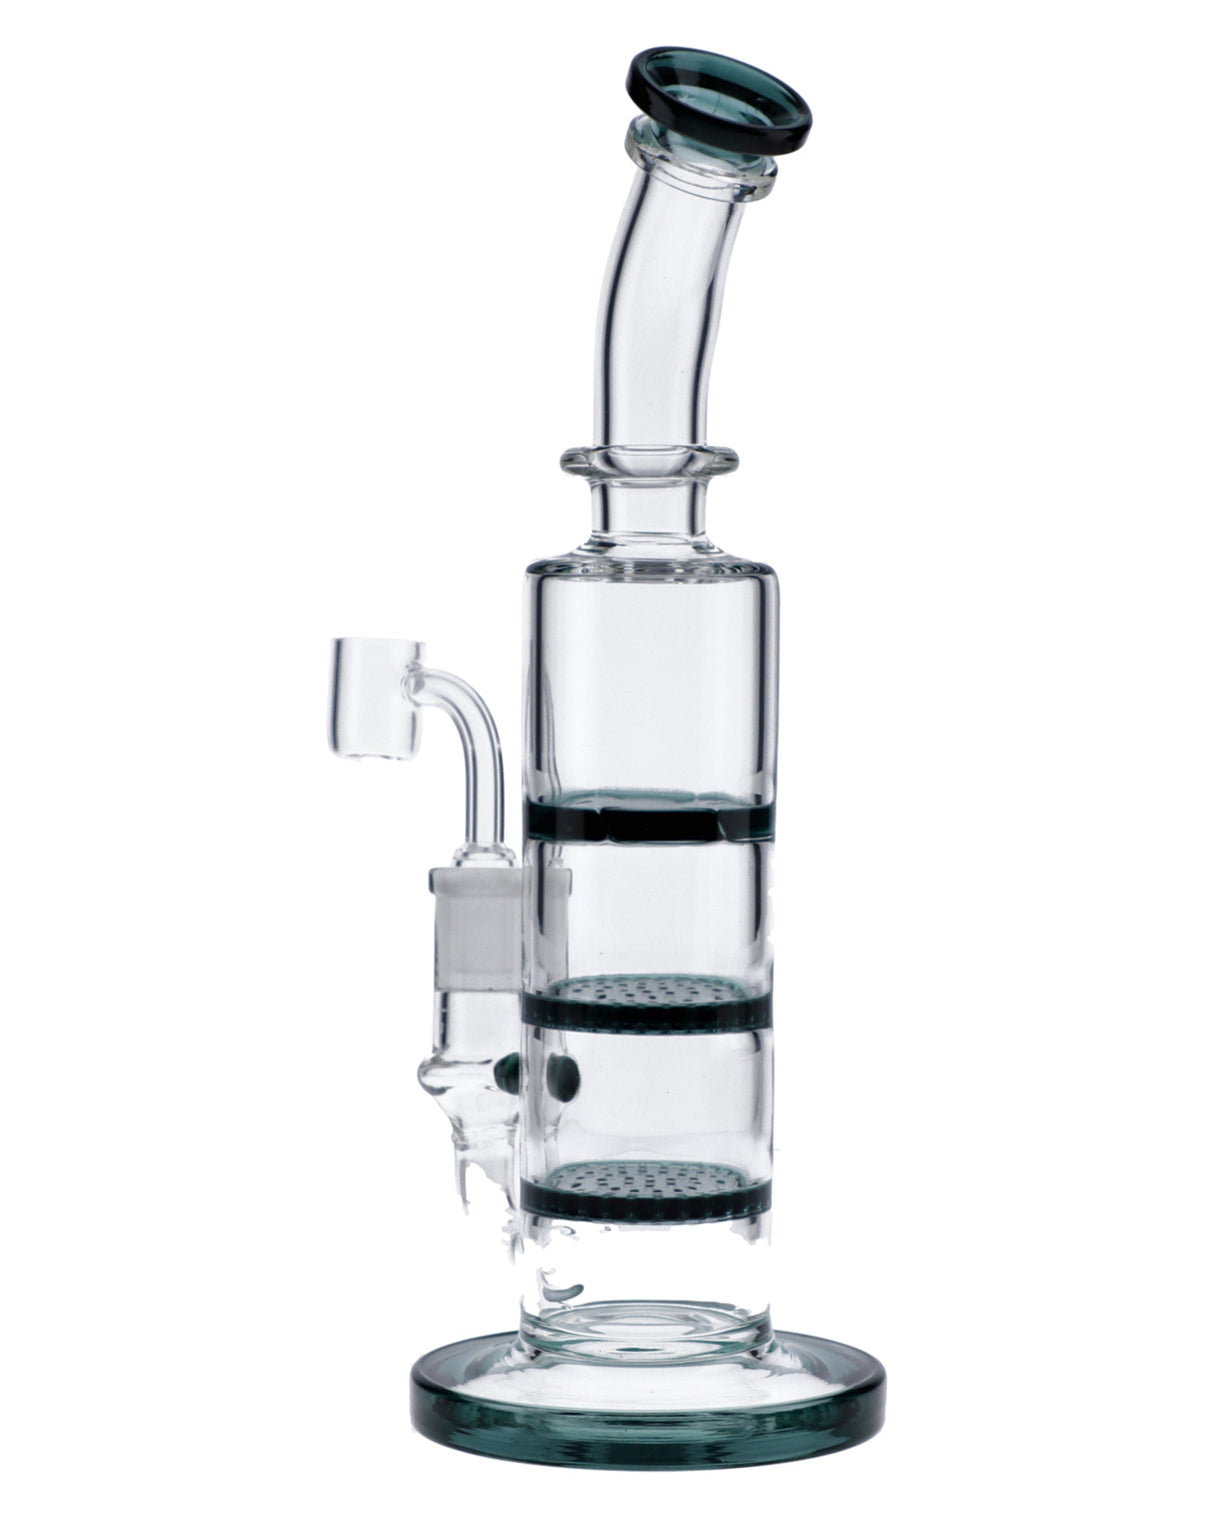 Teal Triple Honeycomb Dab Rig by Valiant Distribution, 9.5in with banger hanger design